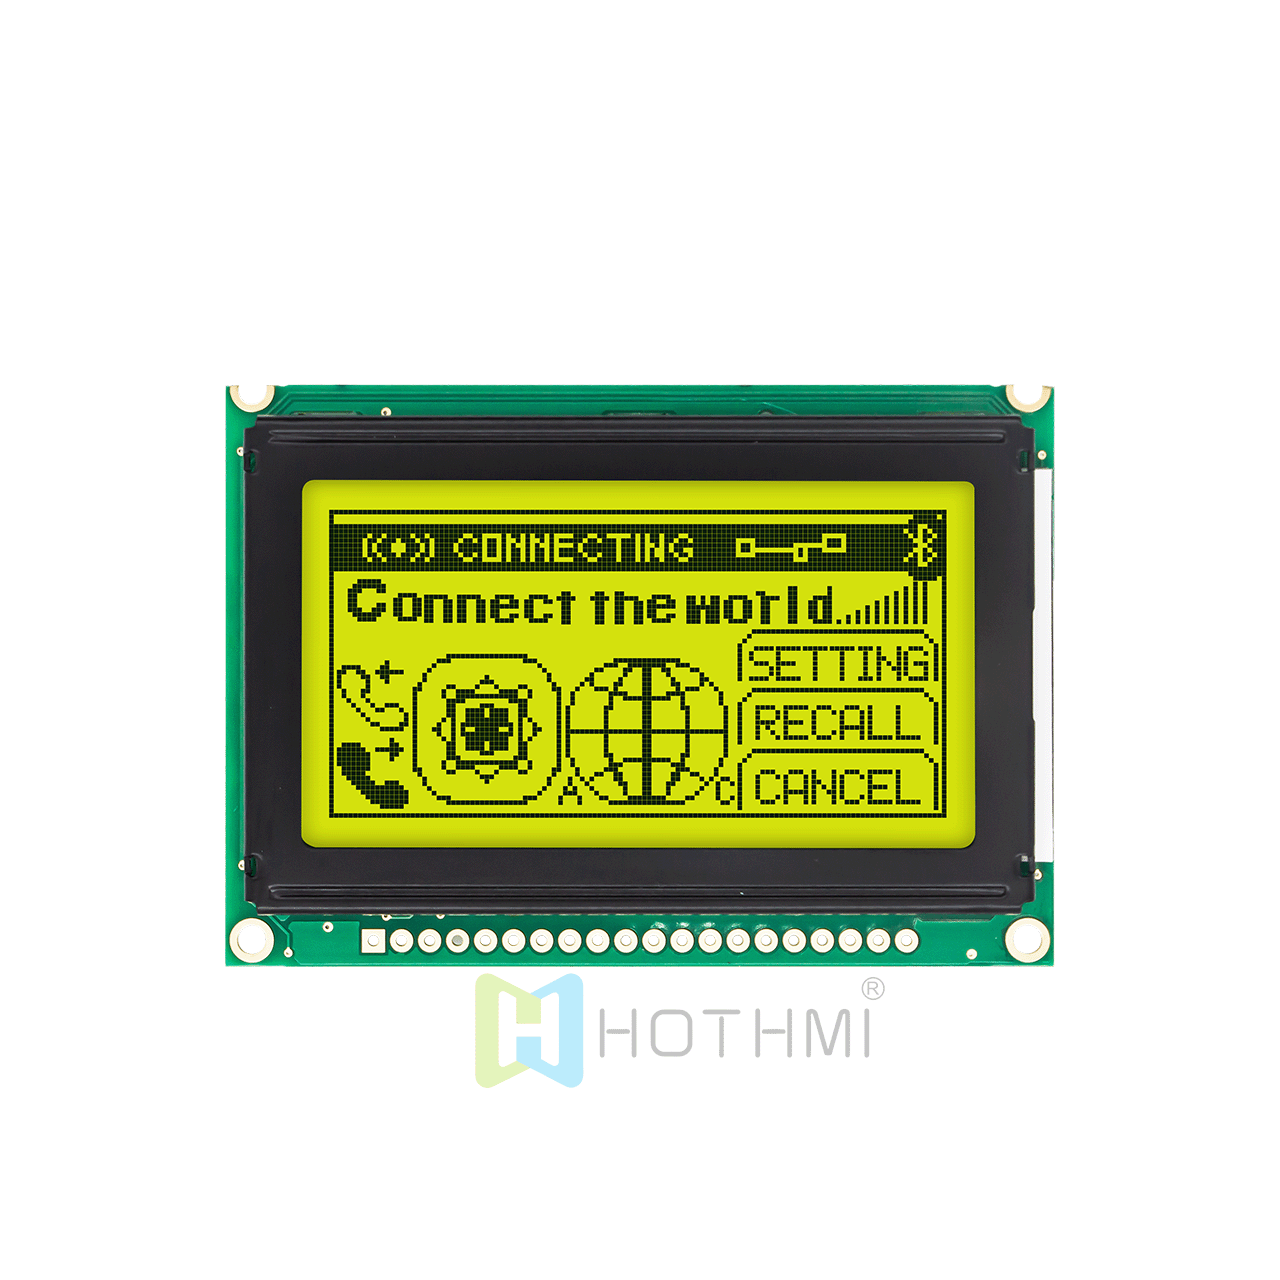 2.7" 128 x 64 Graphic LCD | 12864 Graphic LCD | STN + Yellow-Green Backlight | Transflective Polarizer